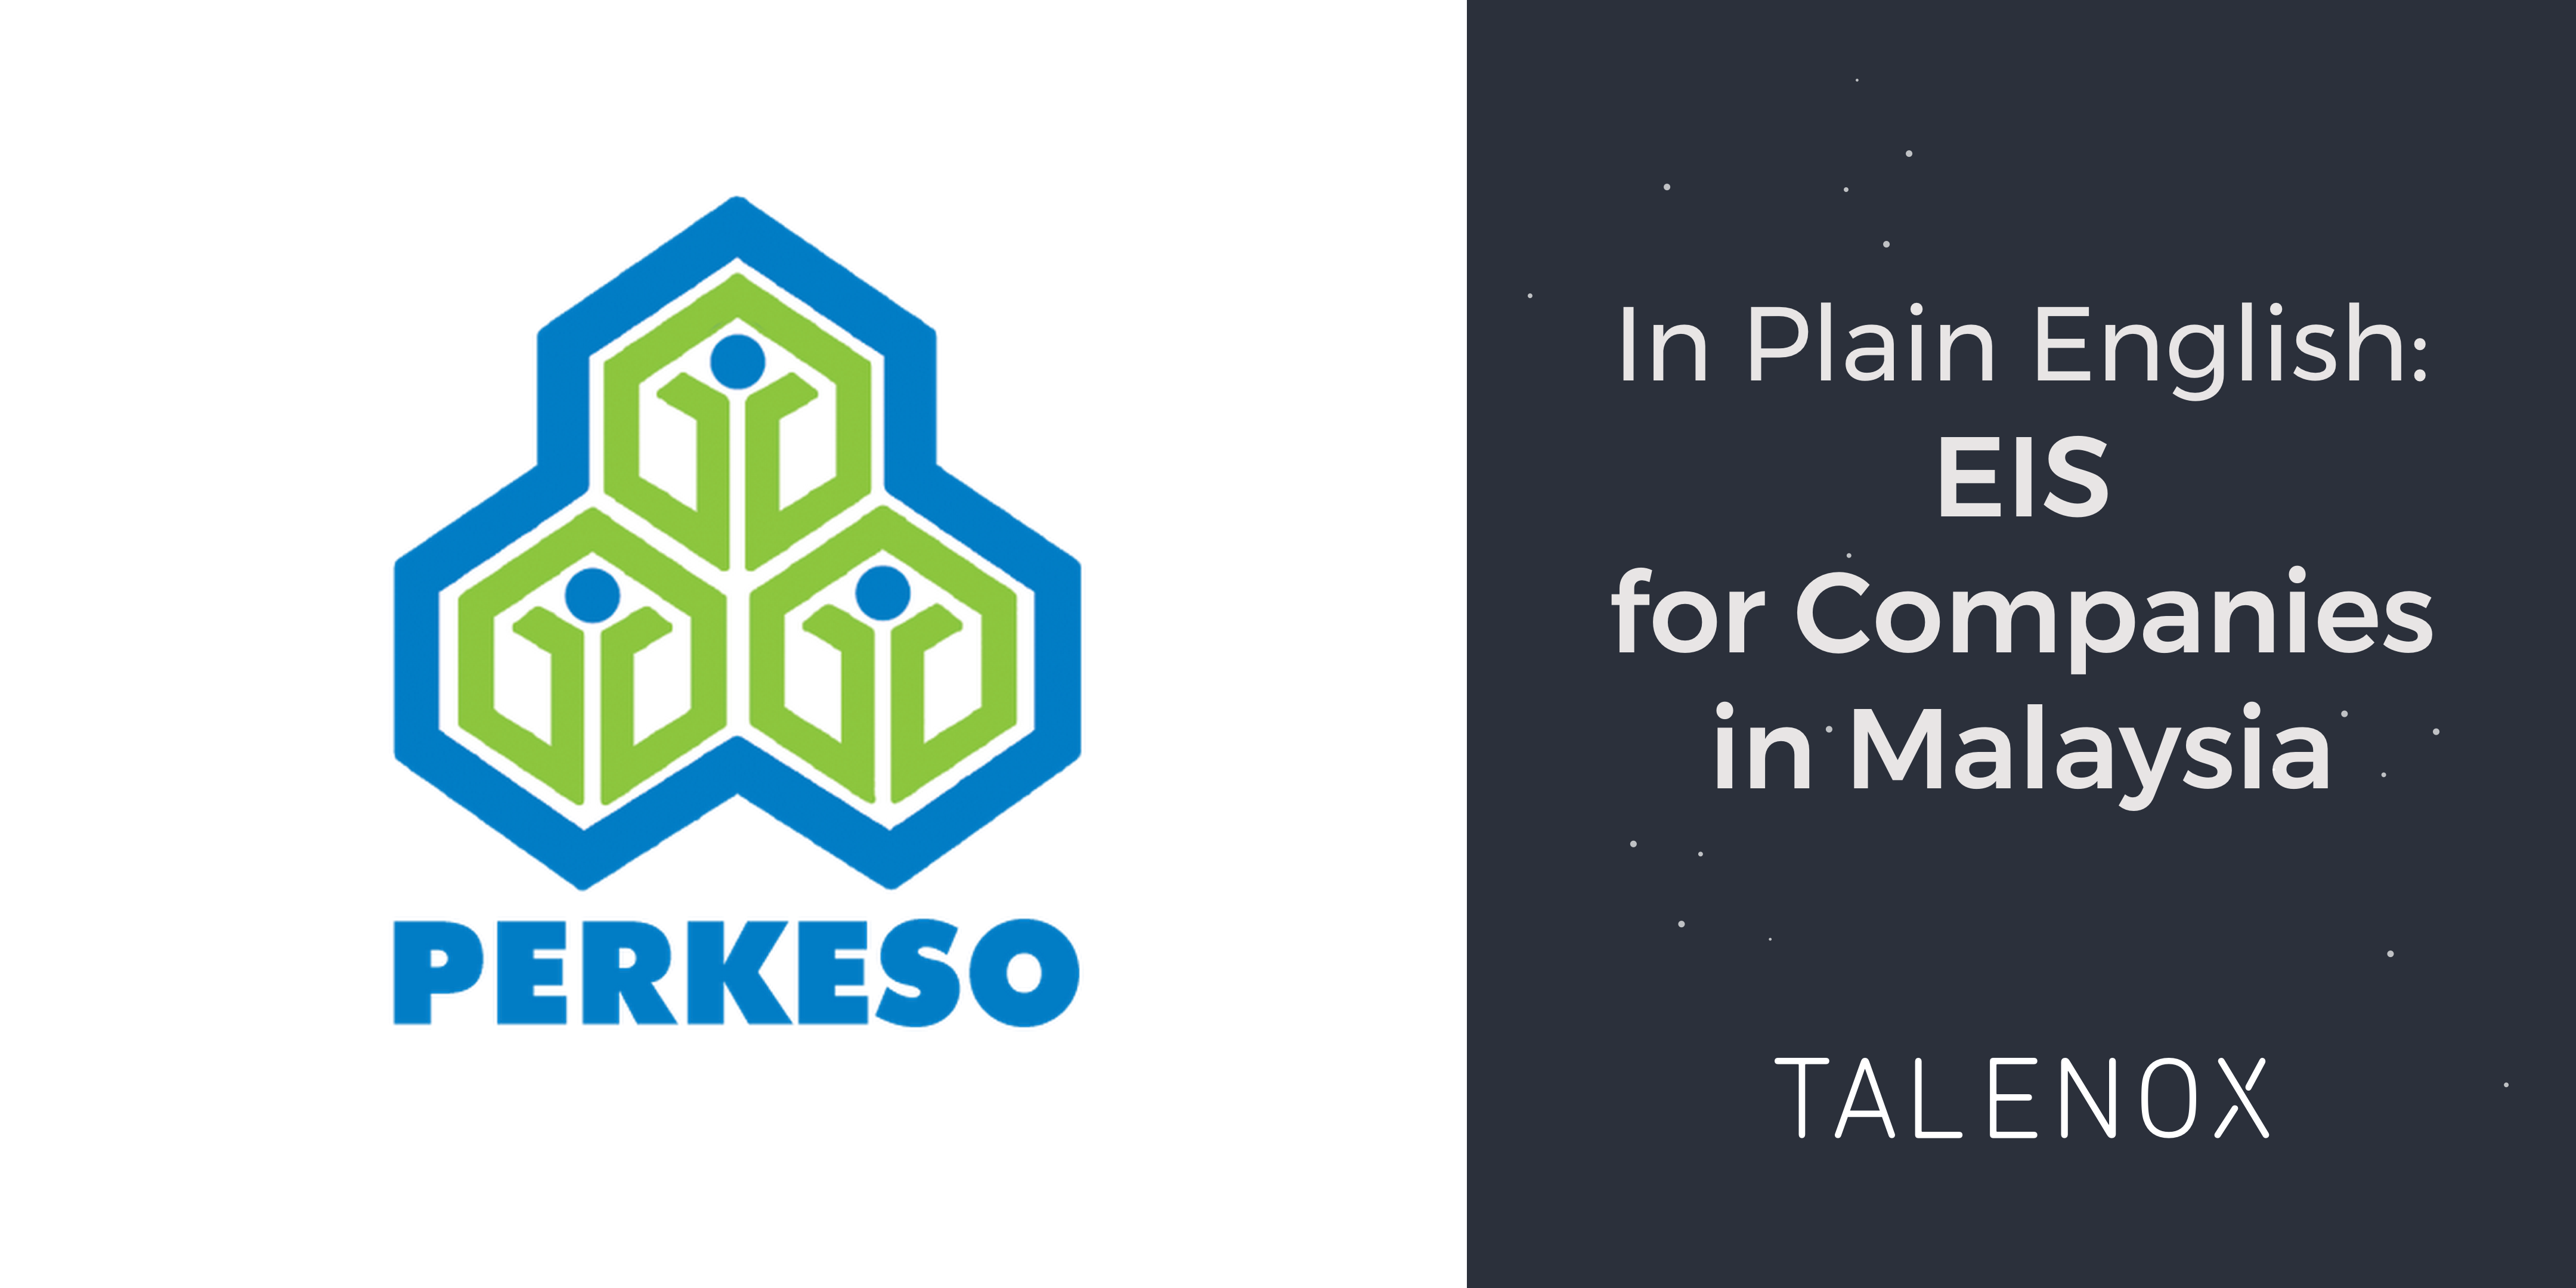 perkeso and talenox logo on banner with text "In Plain English: EIS for companies in Malaysia"